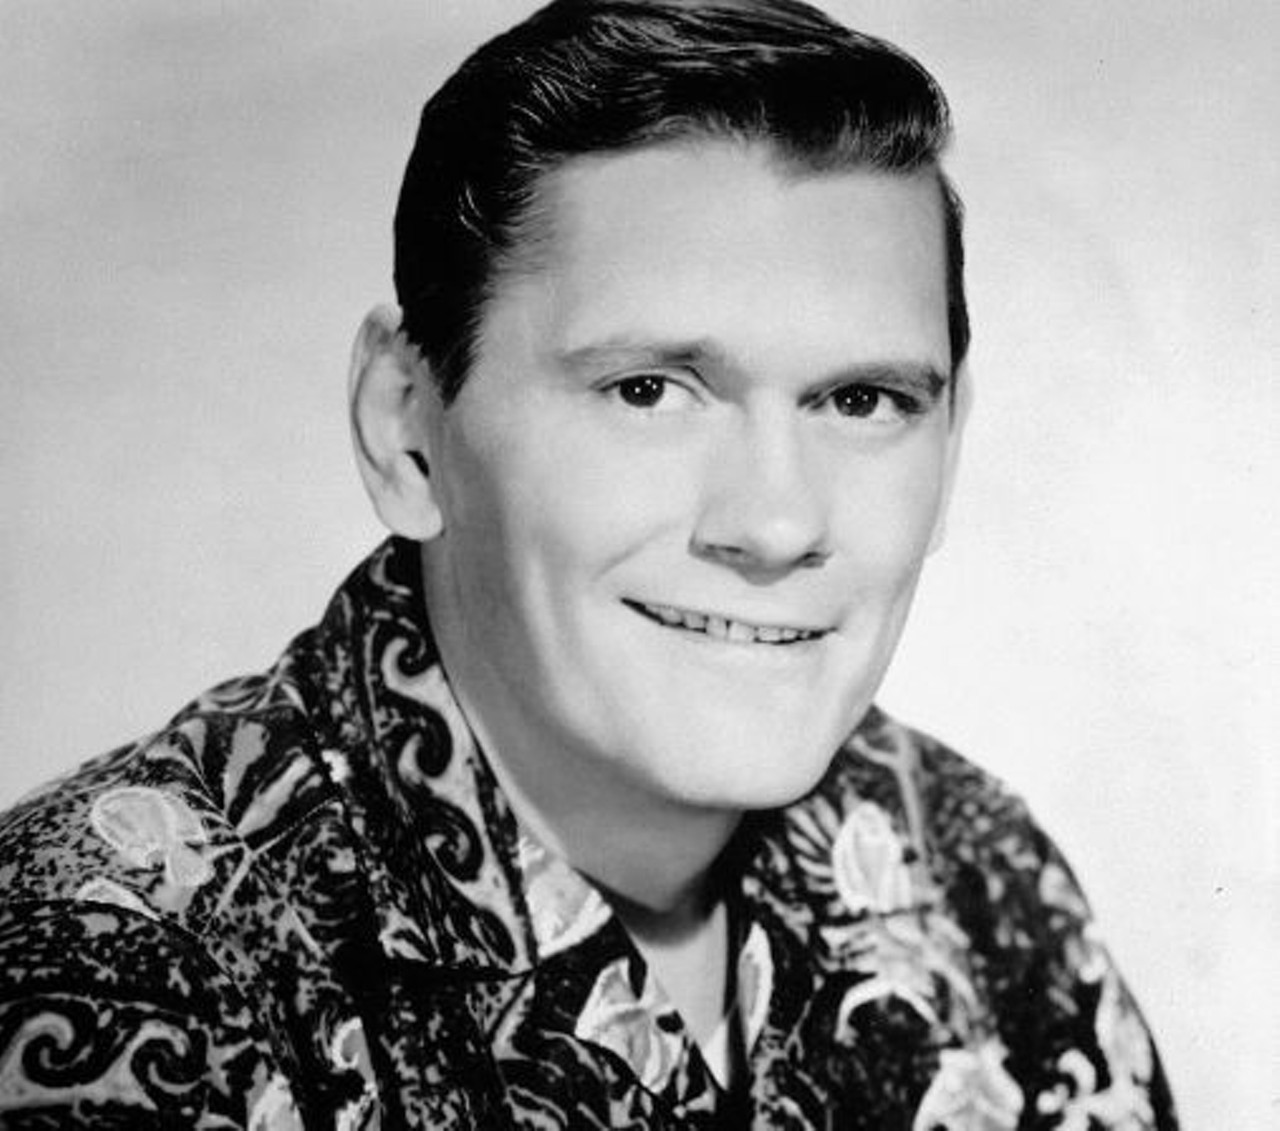 Dick York
Famous for his role as Darrin Stephens in the television series &#147;Bewitched,&#148; Dick York also appeared in &#147;Father Knows Best,&#148; &#147;The Twilight Zone,&#148; and &#147;The Flintstones.&#148; York lived in Rockford following his retirement. After his death in 1992, York was buried in Kent County at the Plainfield Cemetery in Rockford.
Photo via McDermott Company / Wikimedia Commons